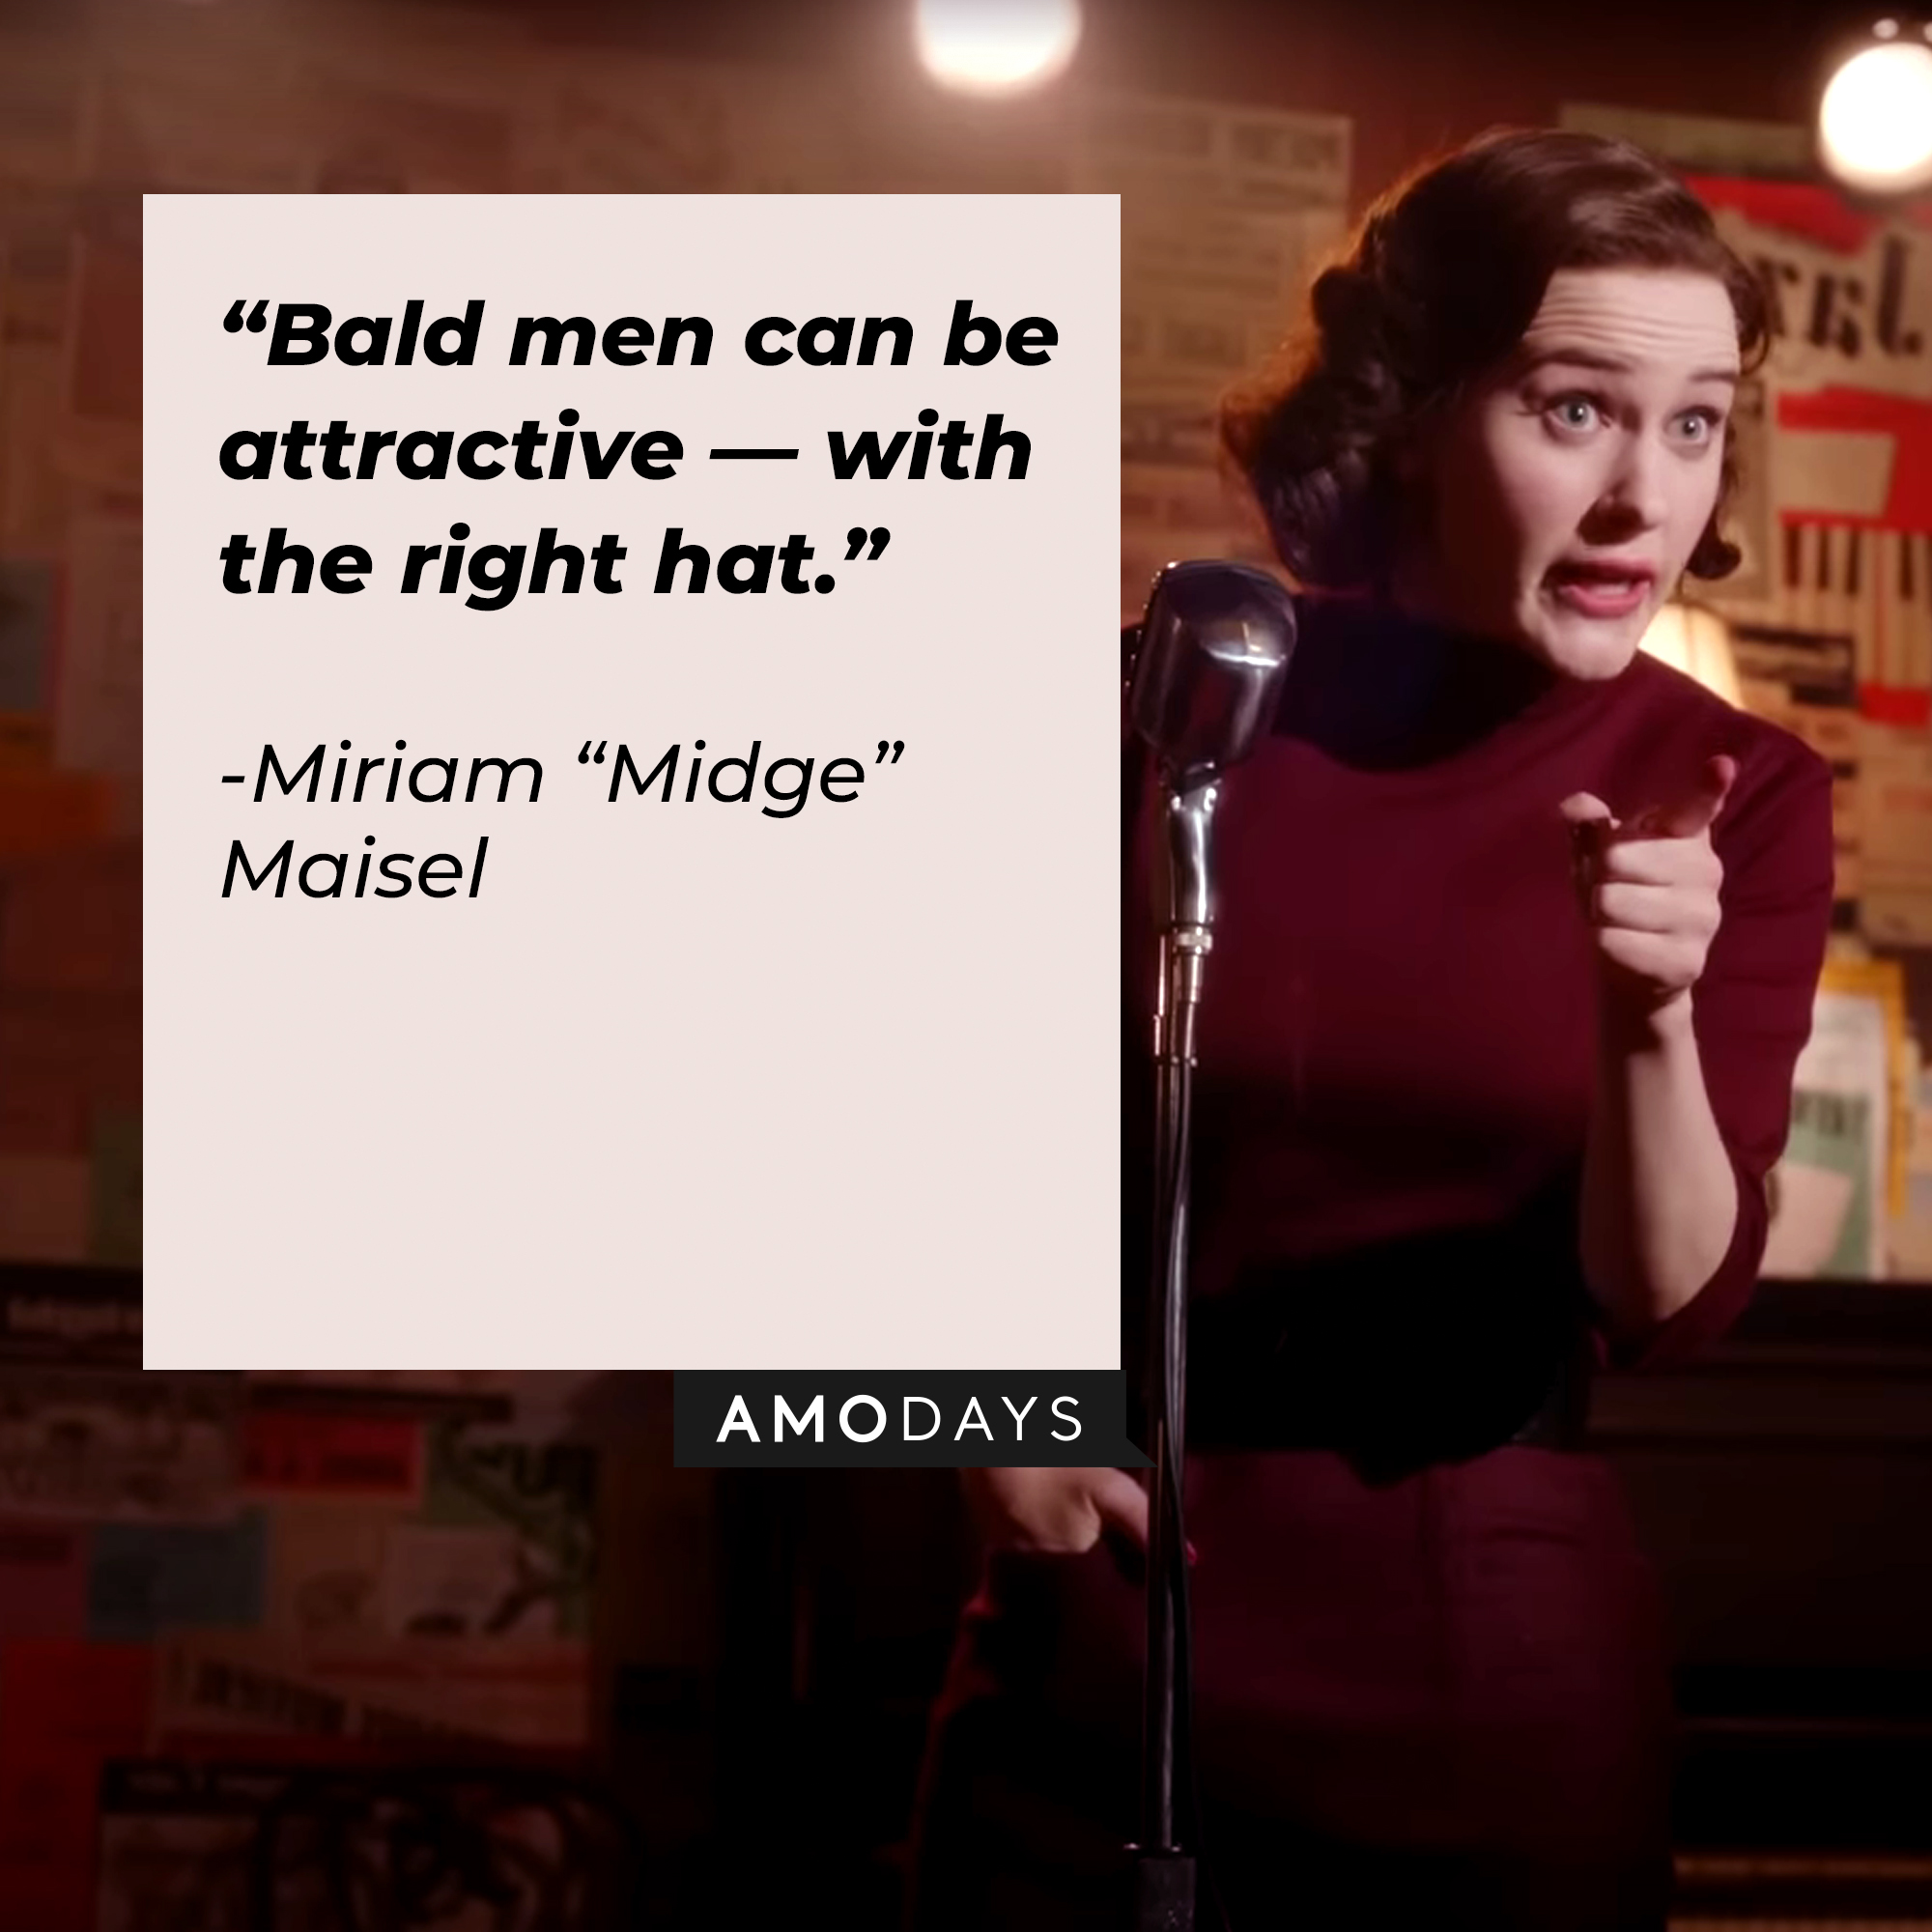 Miriam "Midge" Maisel, with her quote: "Bald men can be attractive—with the right hat." | Source: youtube.com/PrimeVideoUK